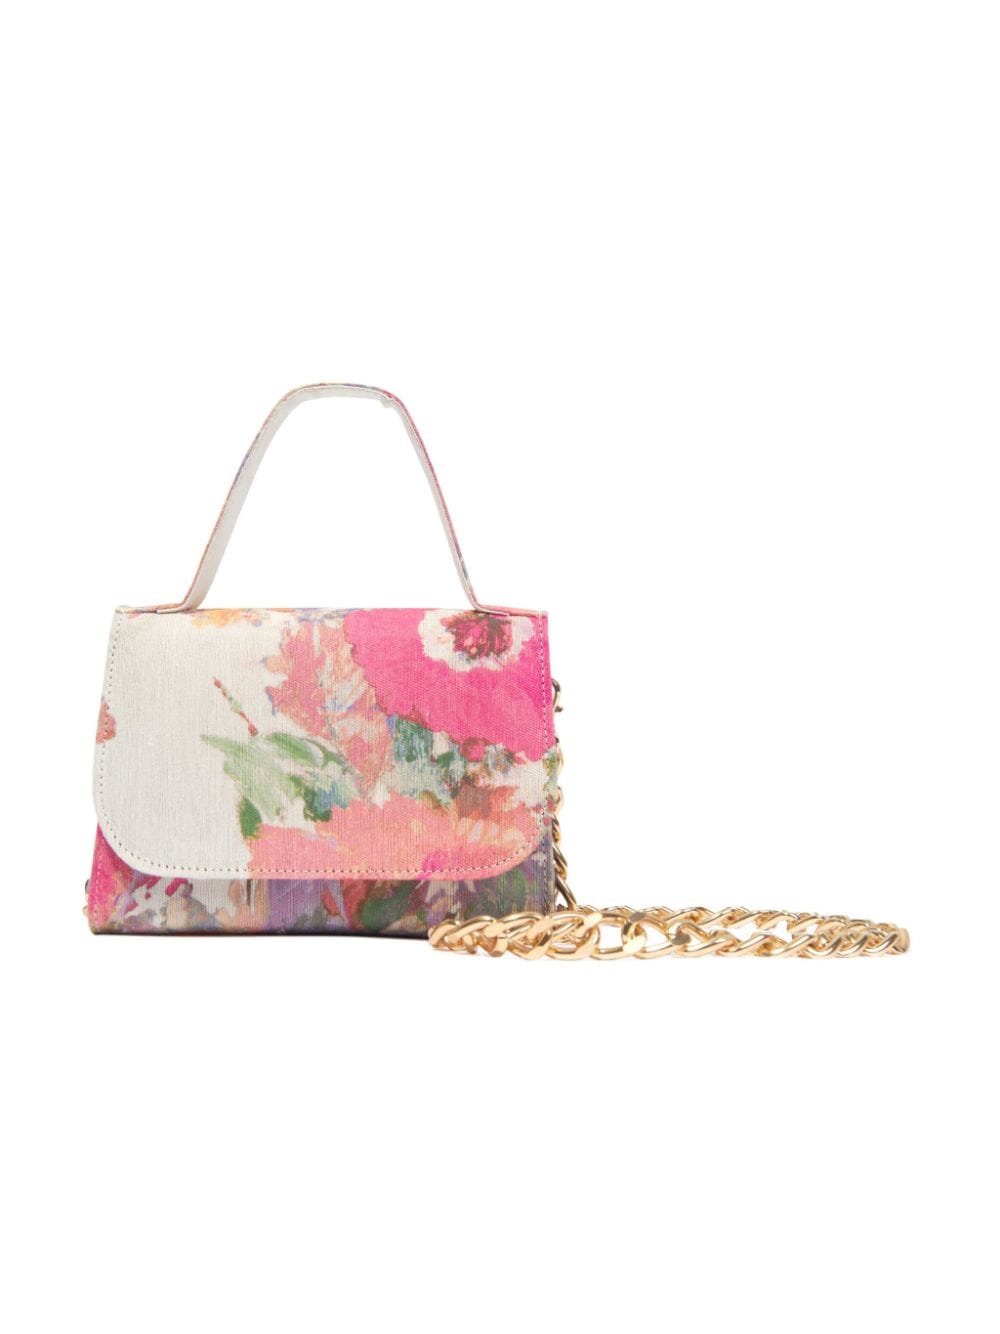 MARCHESA KIDS COUTURE floral-print tote bag - Pink von MARCHESA KIDS COUTURE